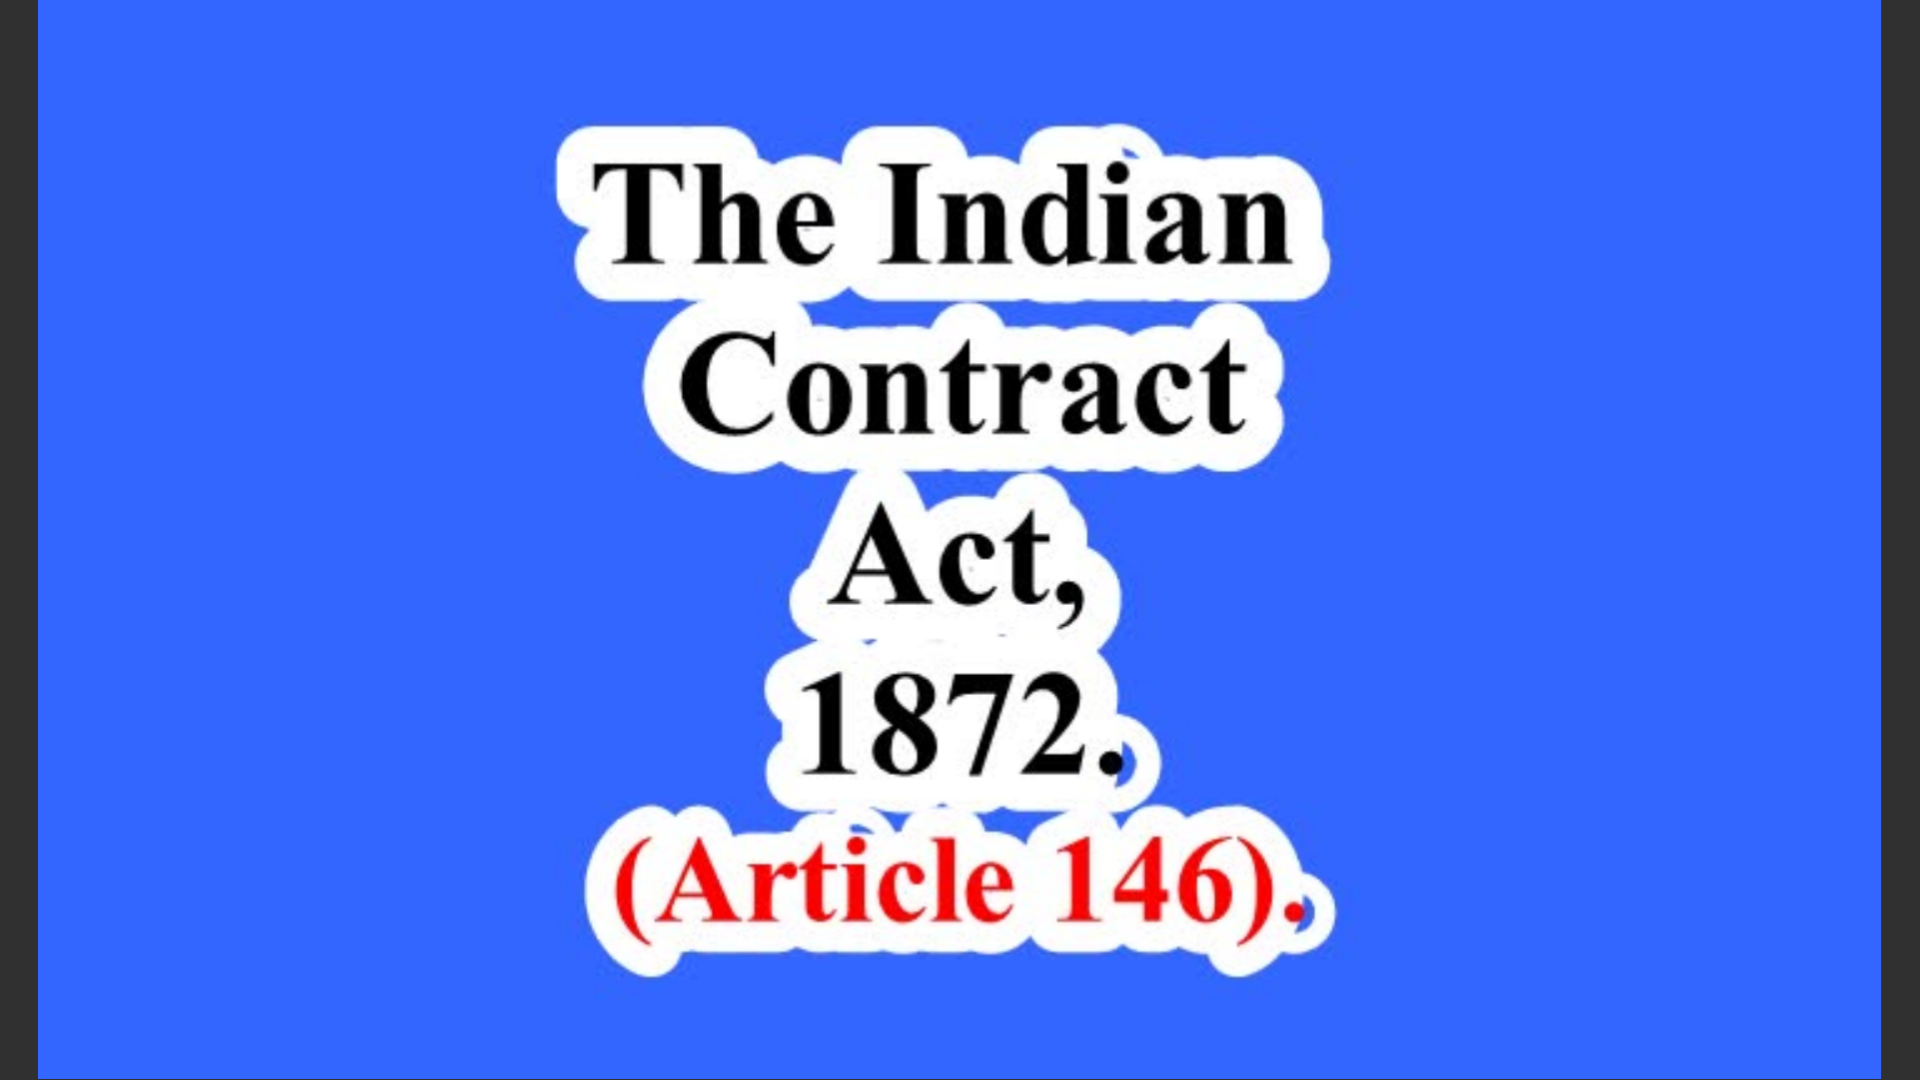 The Indian Contract Act, 1872. (Article 146).